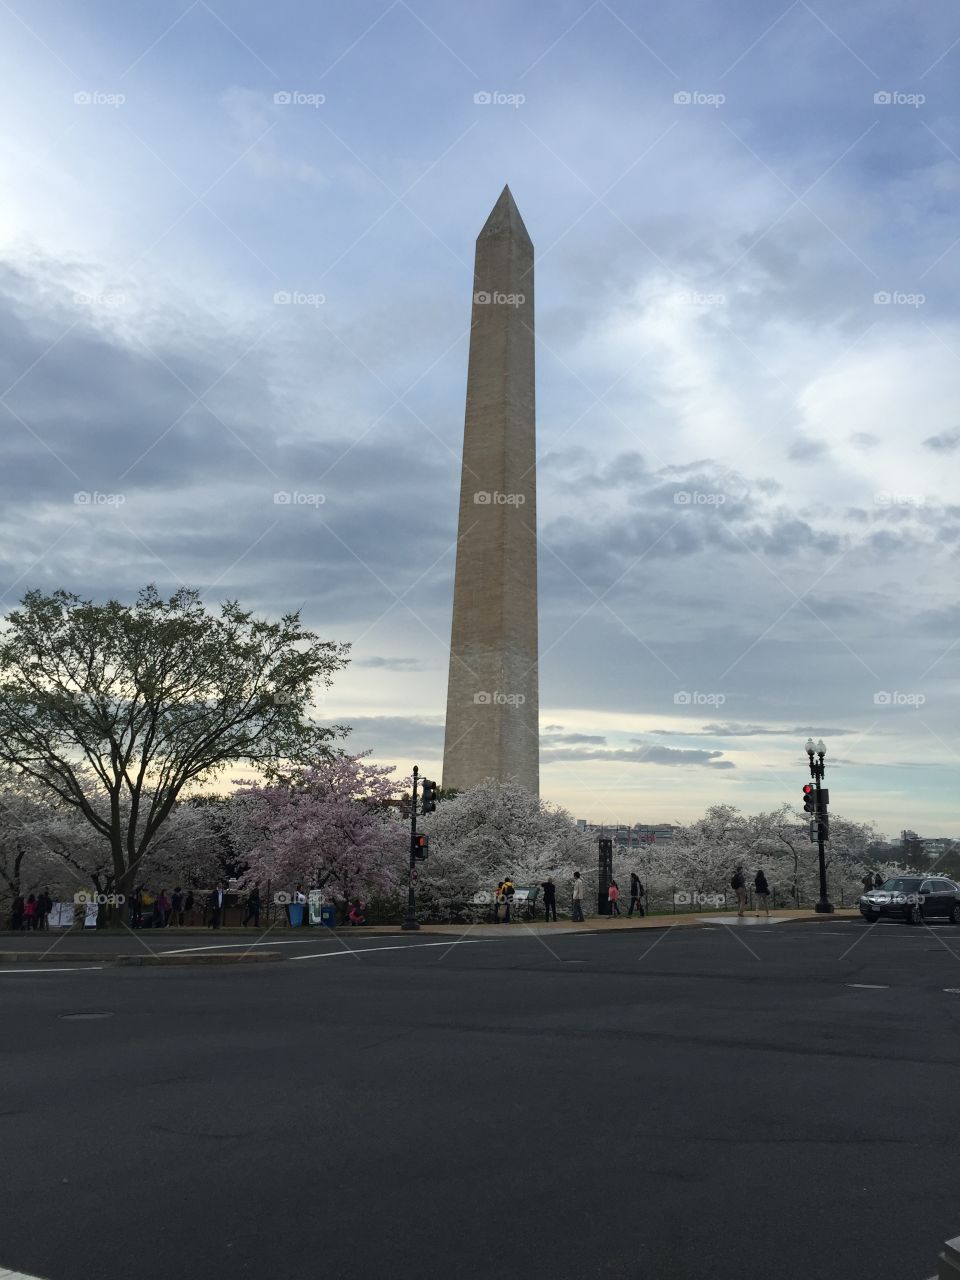 Washington Monument. Washington Monument with cherry blossoms blooming